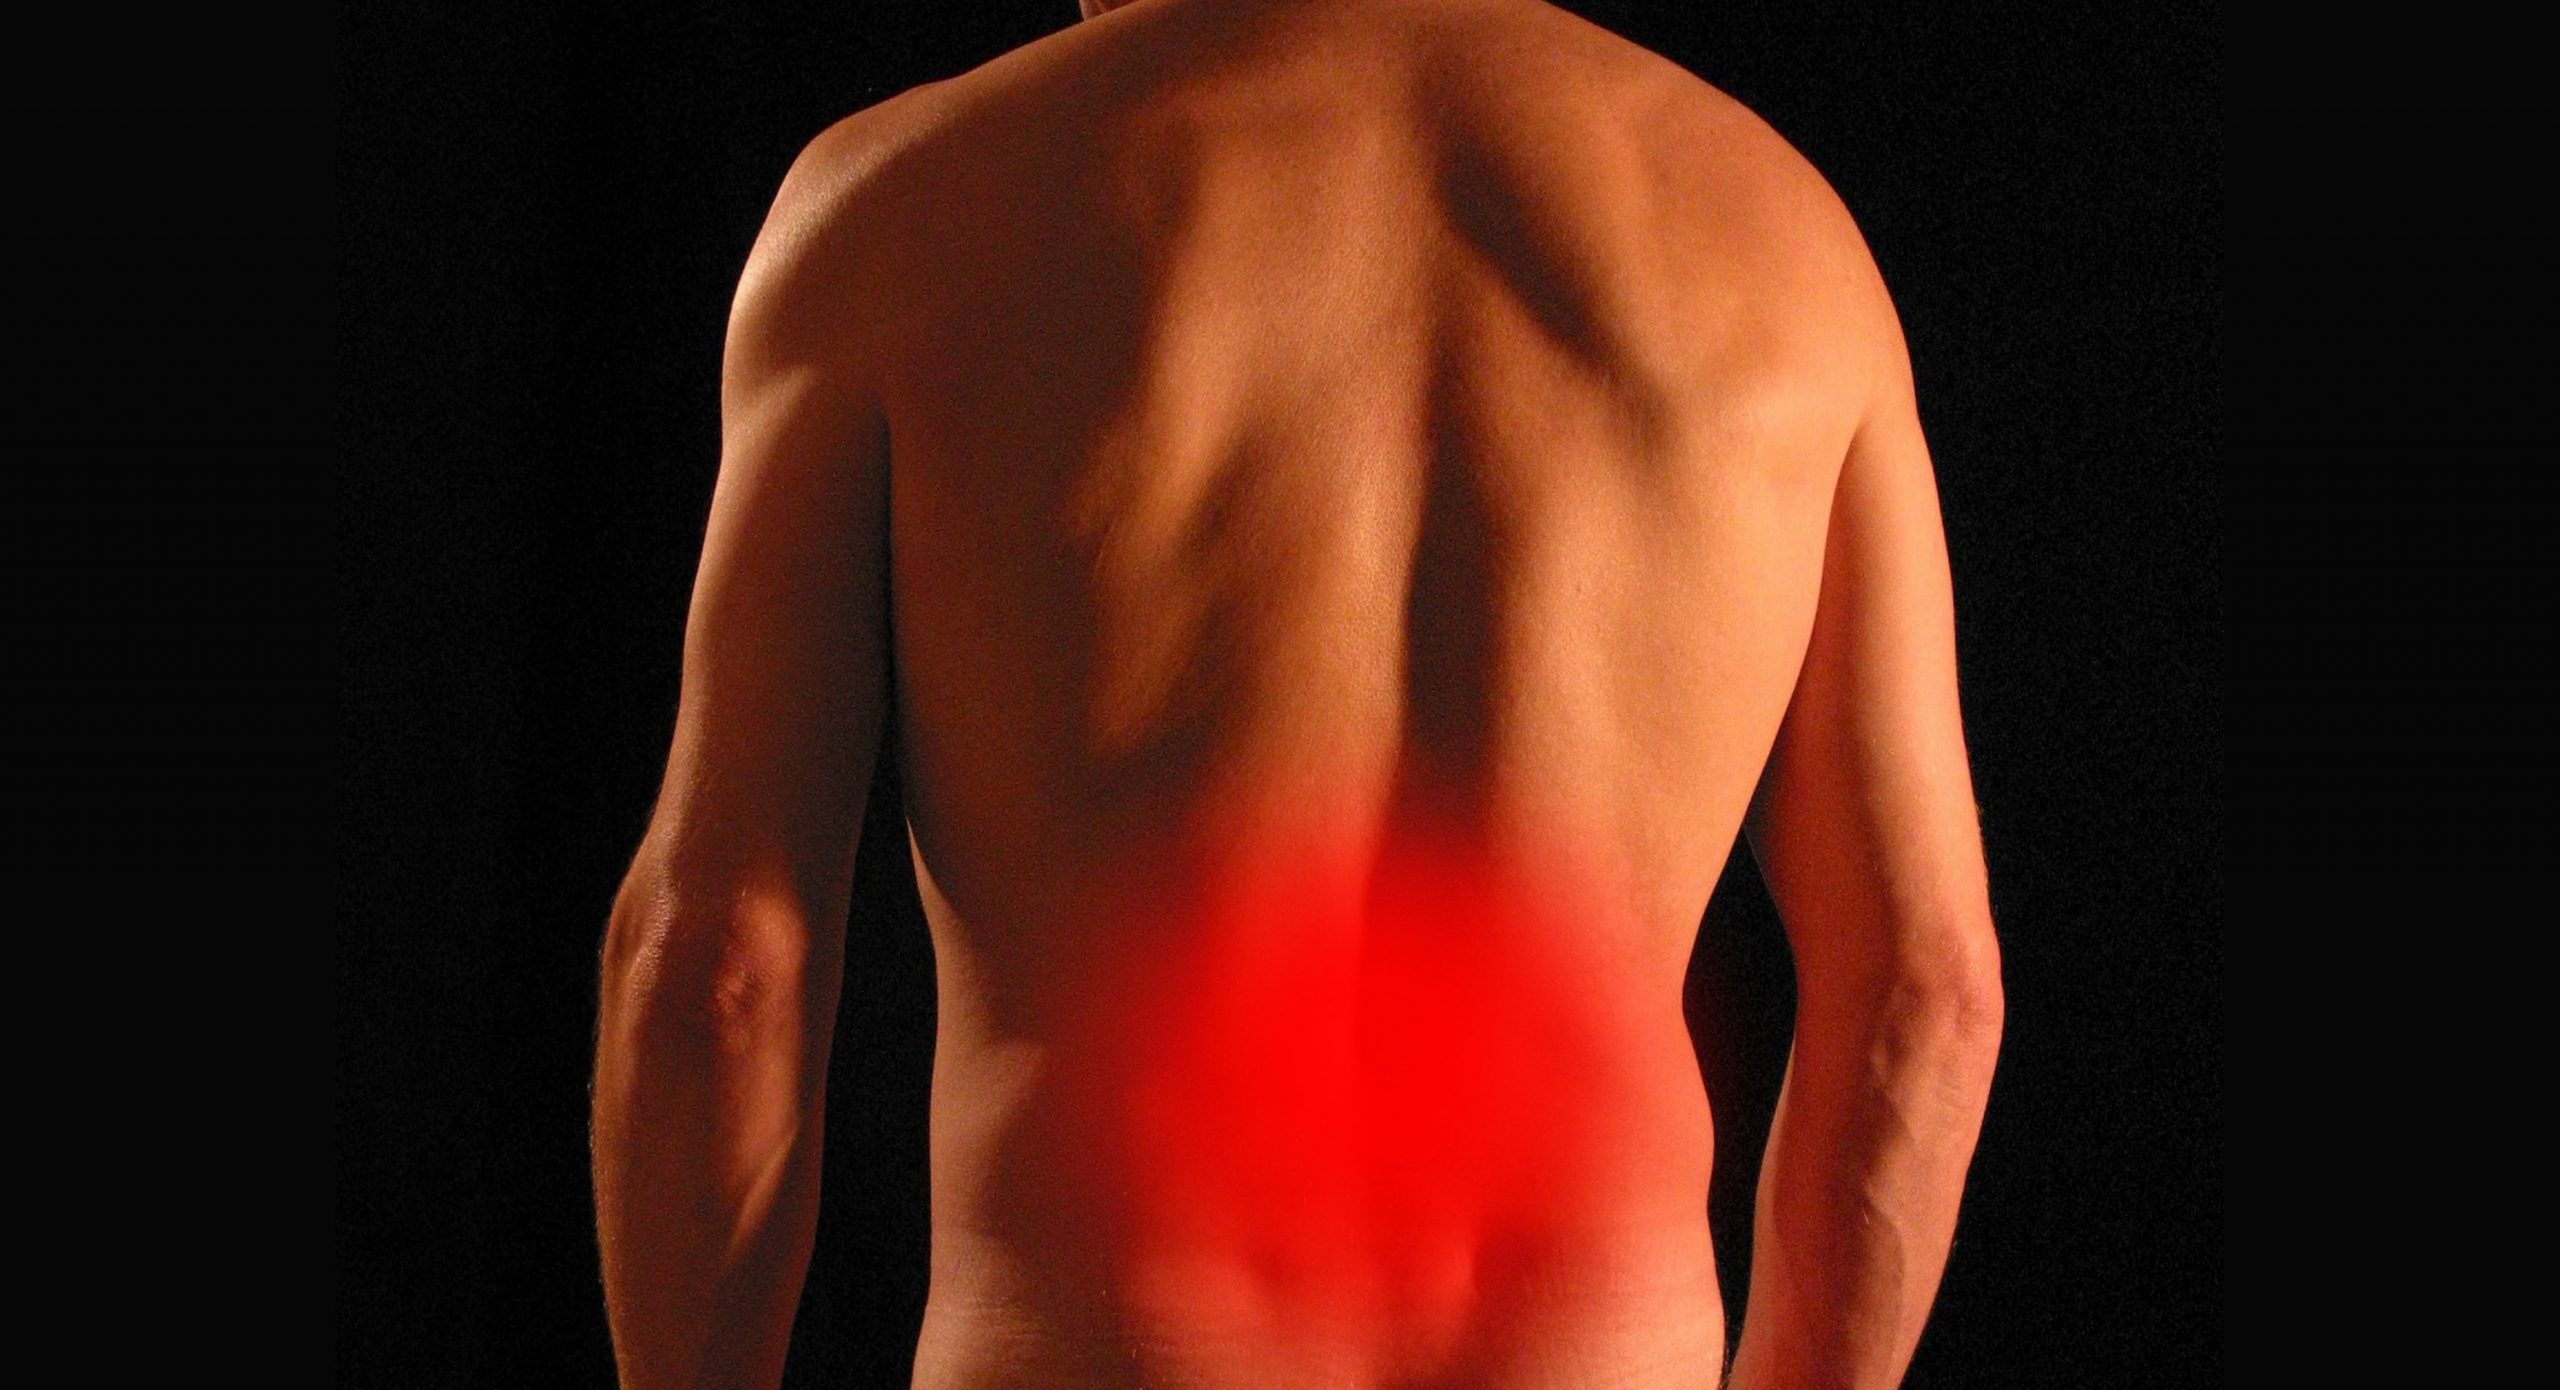 Chronic pain in Spain affects over nine million people – a quarter of the adult population